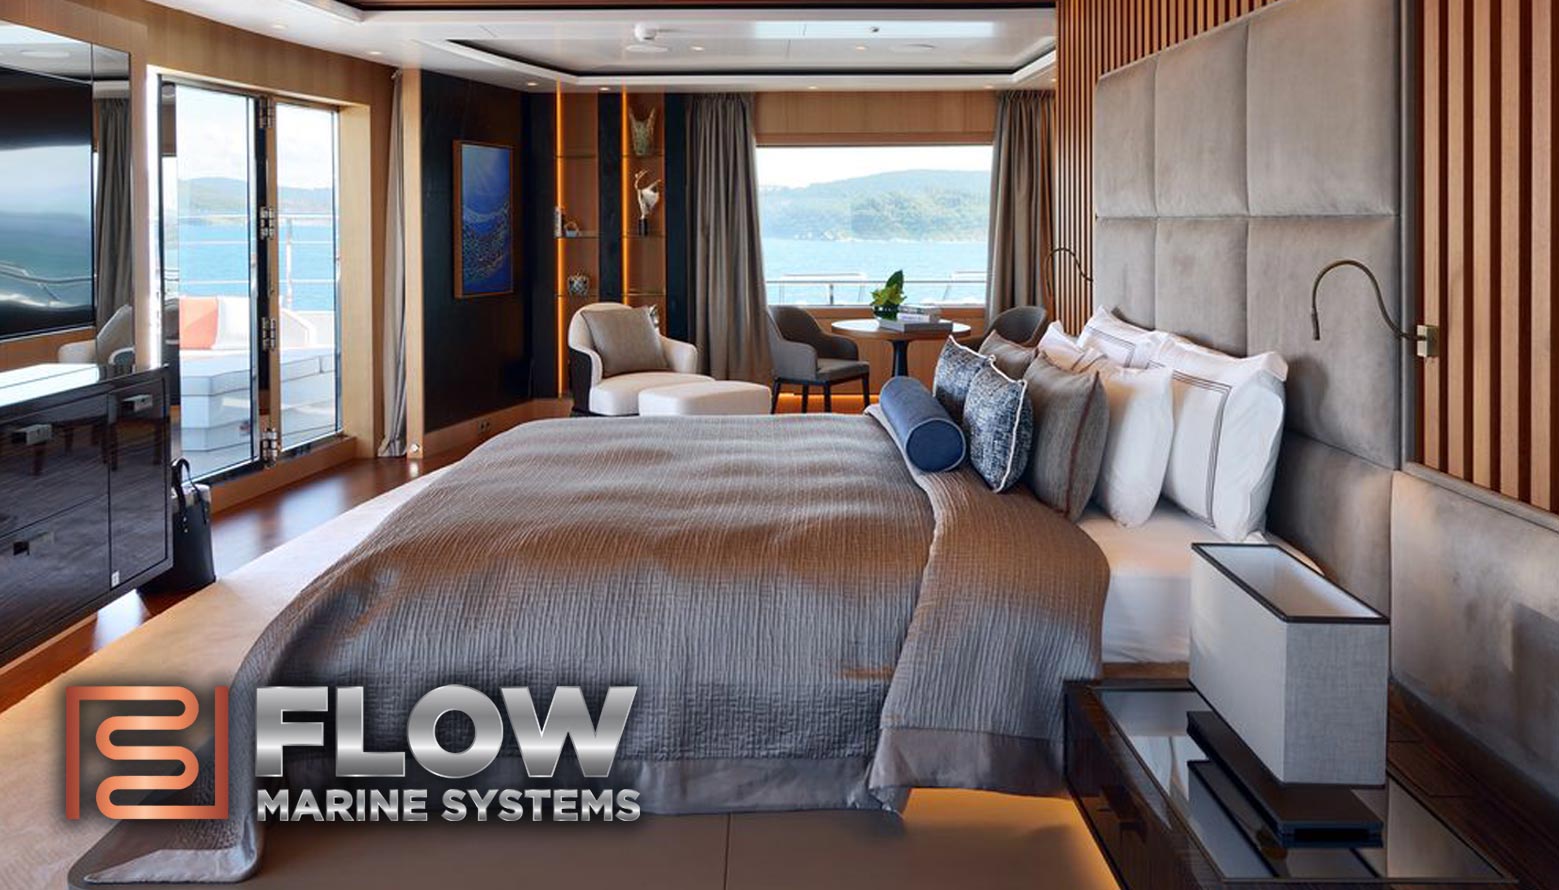 Improving Sleep Comfort on a Boat - Flow Marine Systems - Leadin Manufacturer of Marine Air Conditioning and Refrigeration Systems